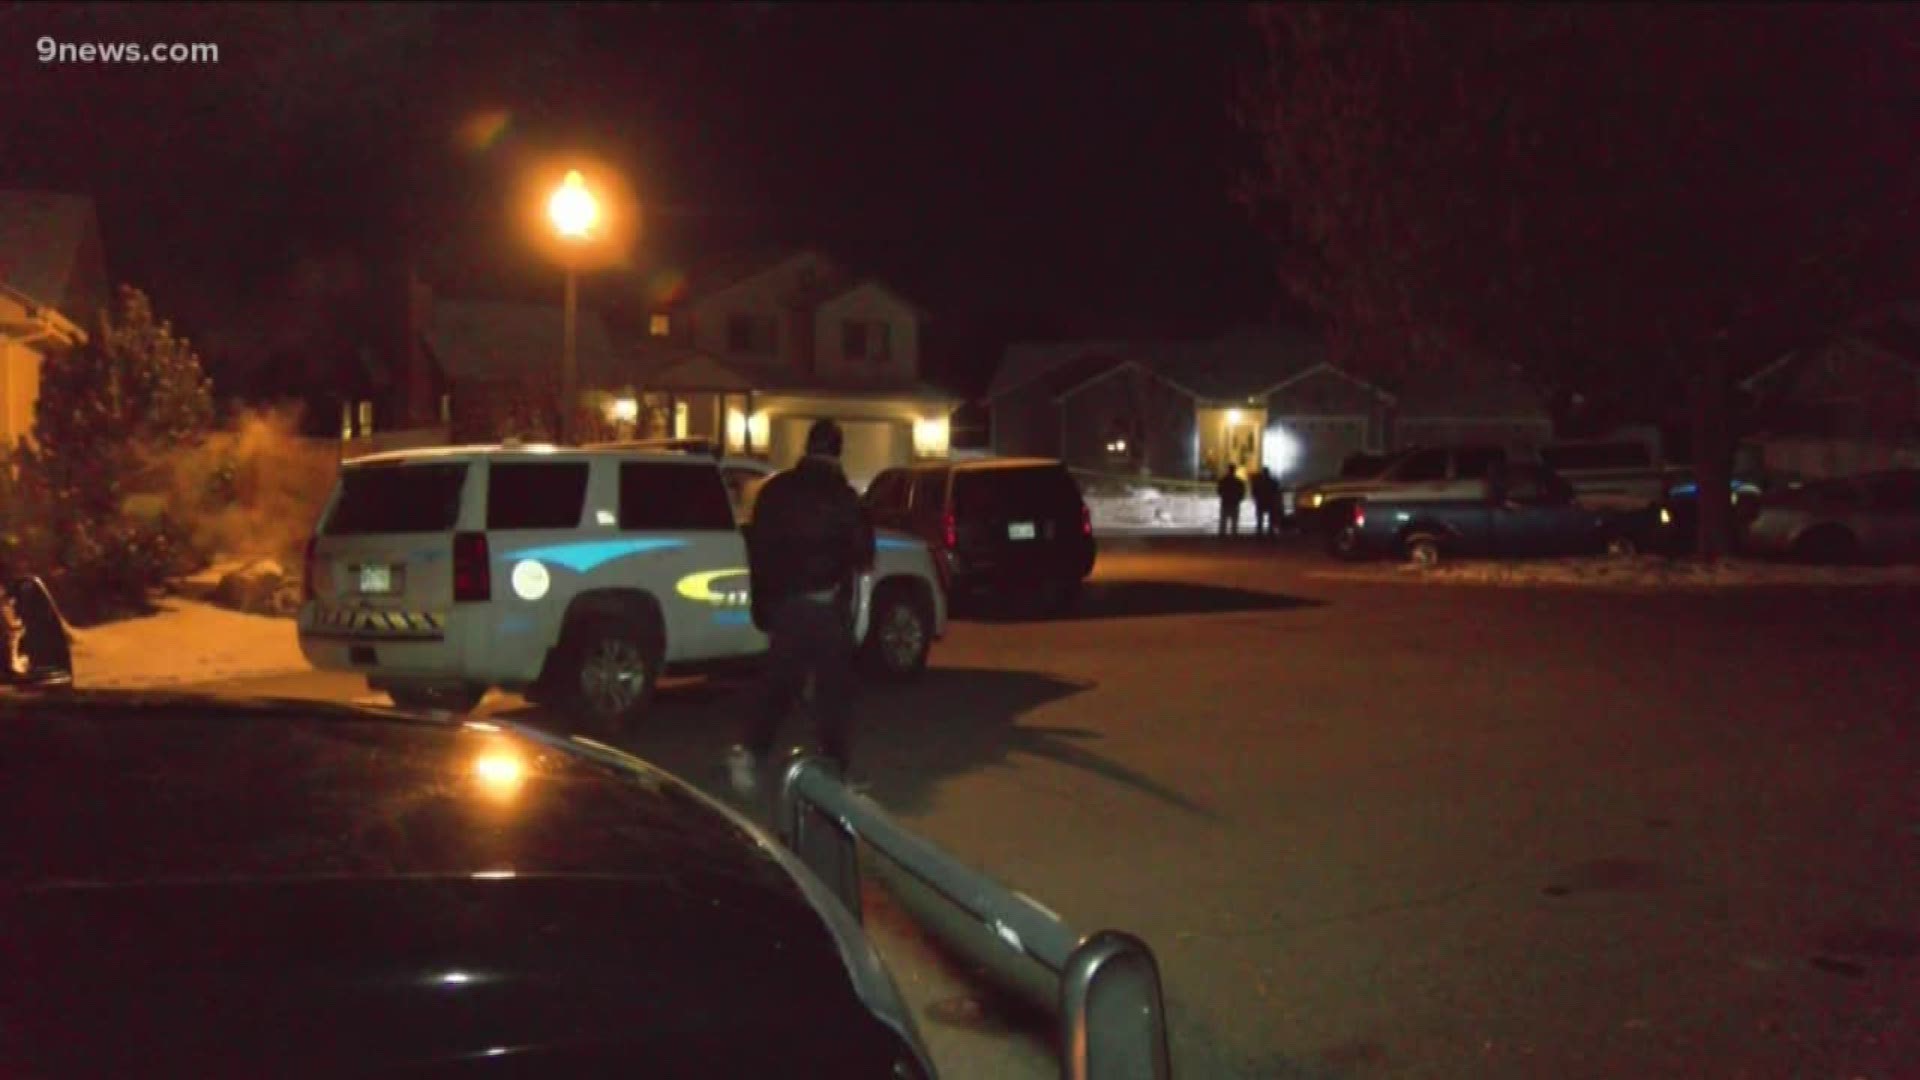 Loveland police encountered the woman Monday evening while investigating a possible homicide.